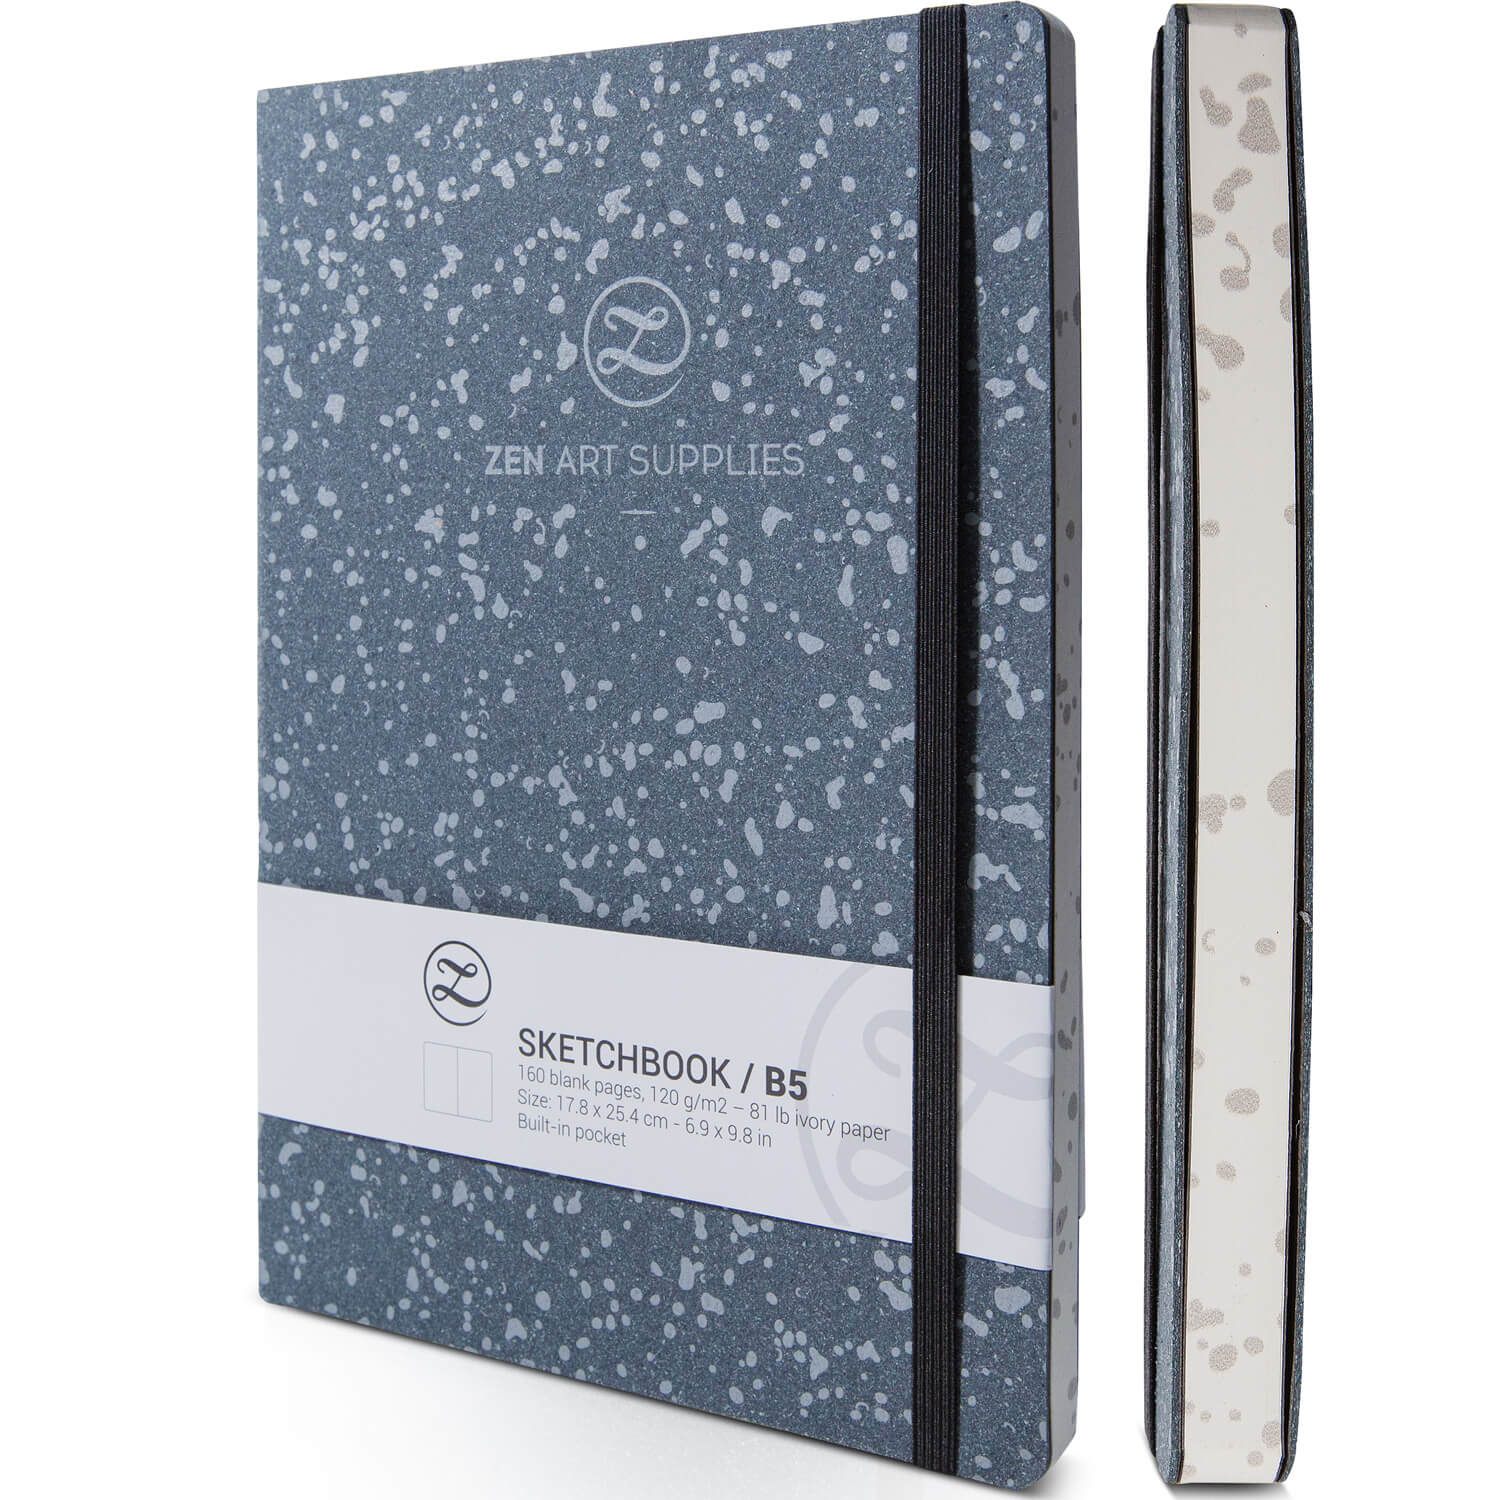 The Perfect Sketchbook for Travel Artists & Art Enthusiasts by